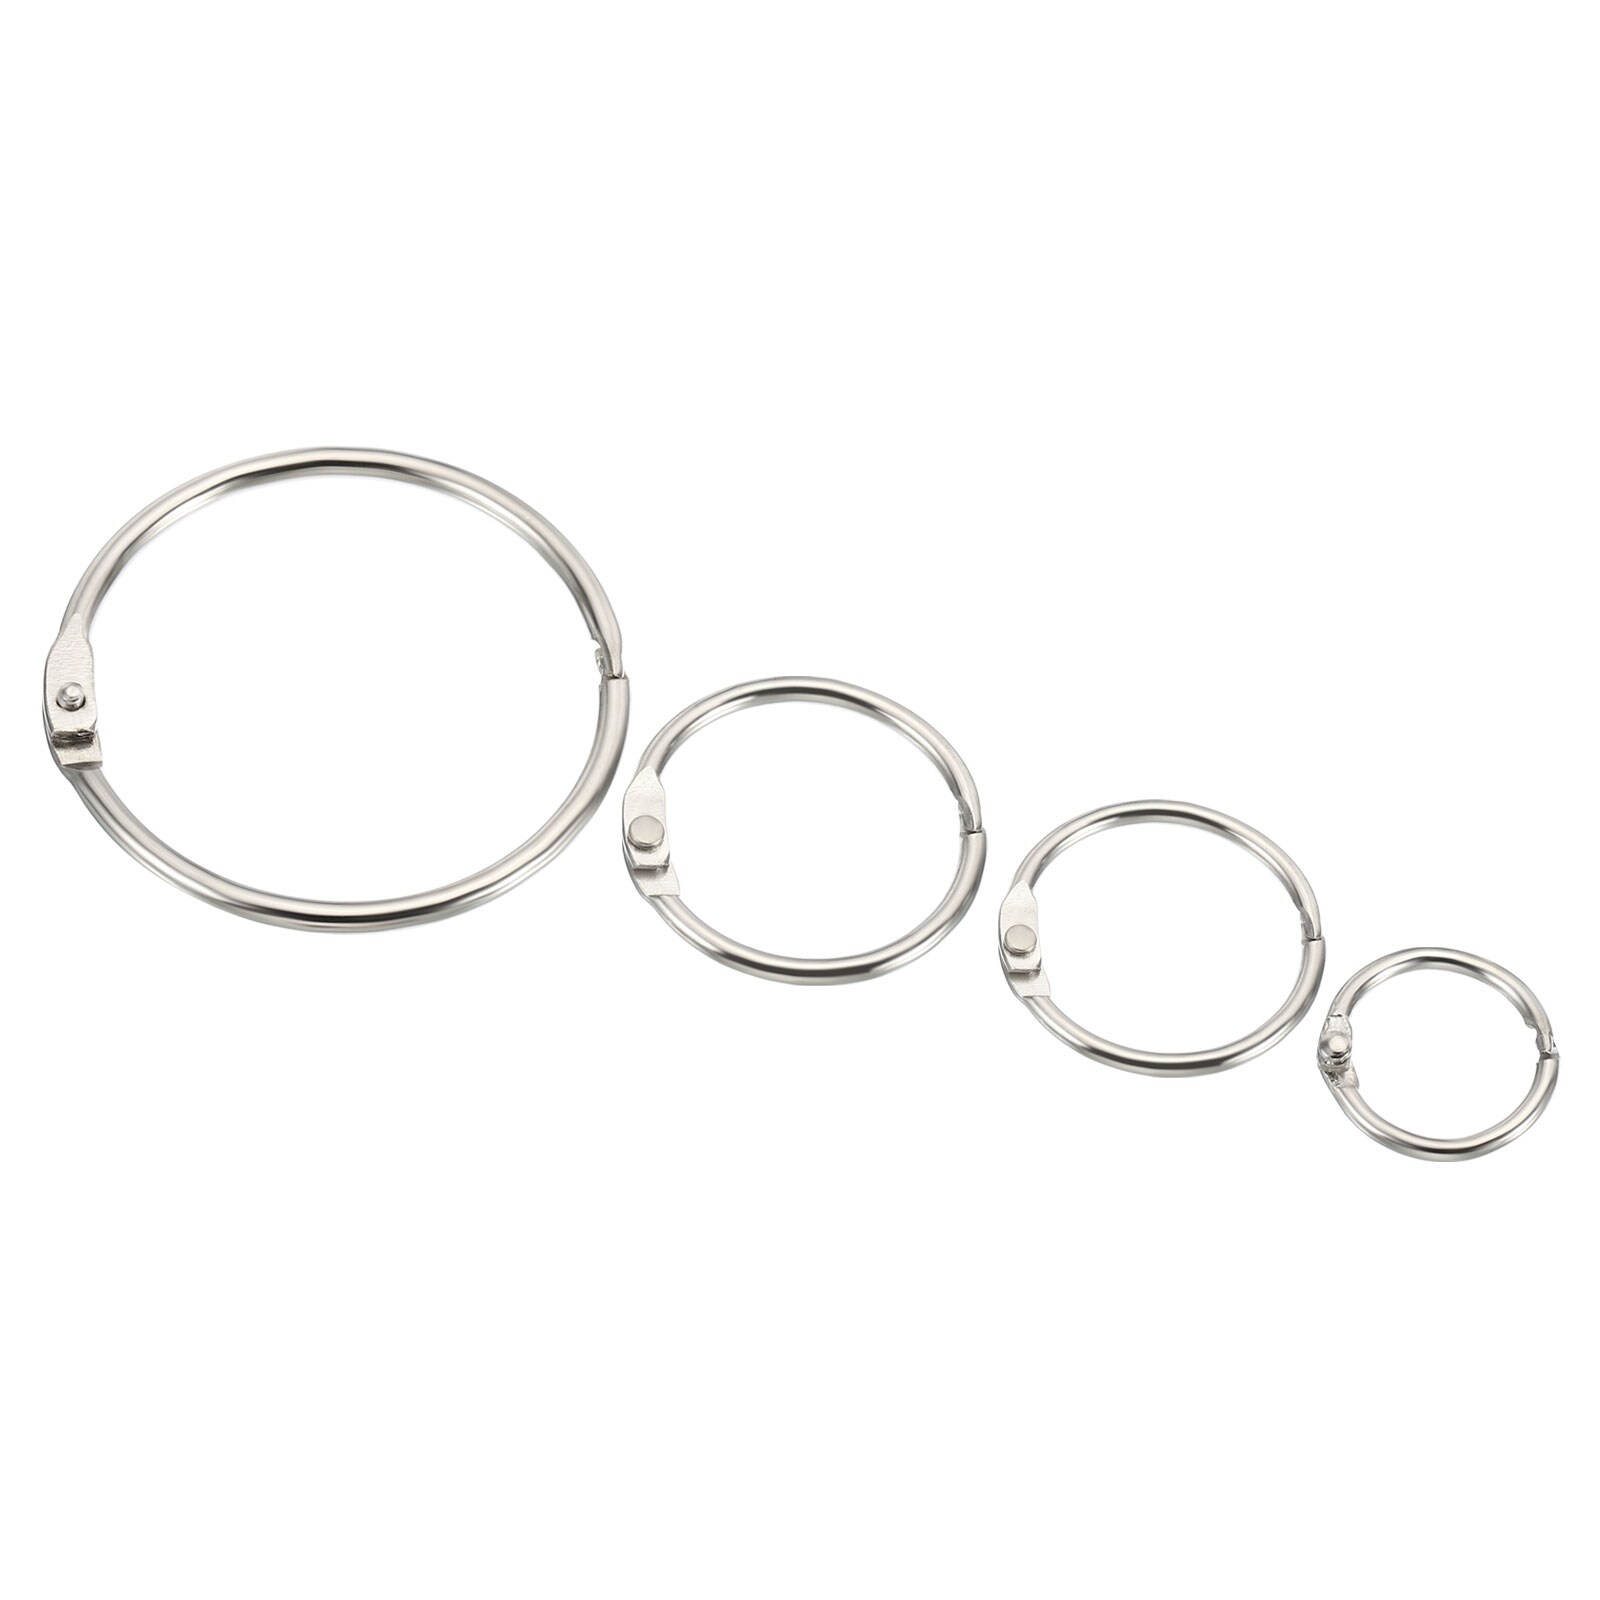 Metal O Ring 48mm(1.89) ID 4.8mm Thickness Iron Rings for DIY